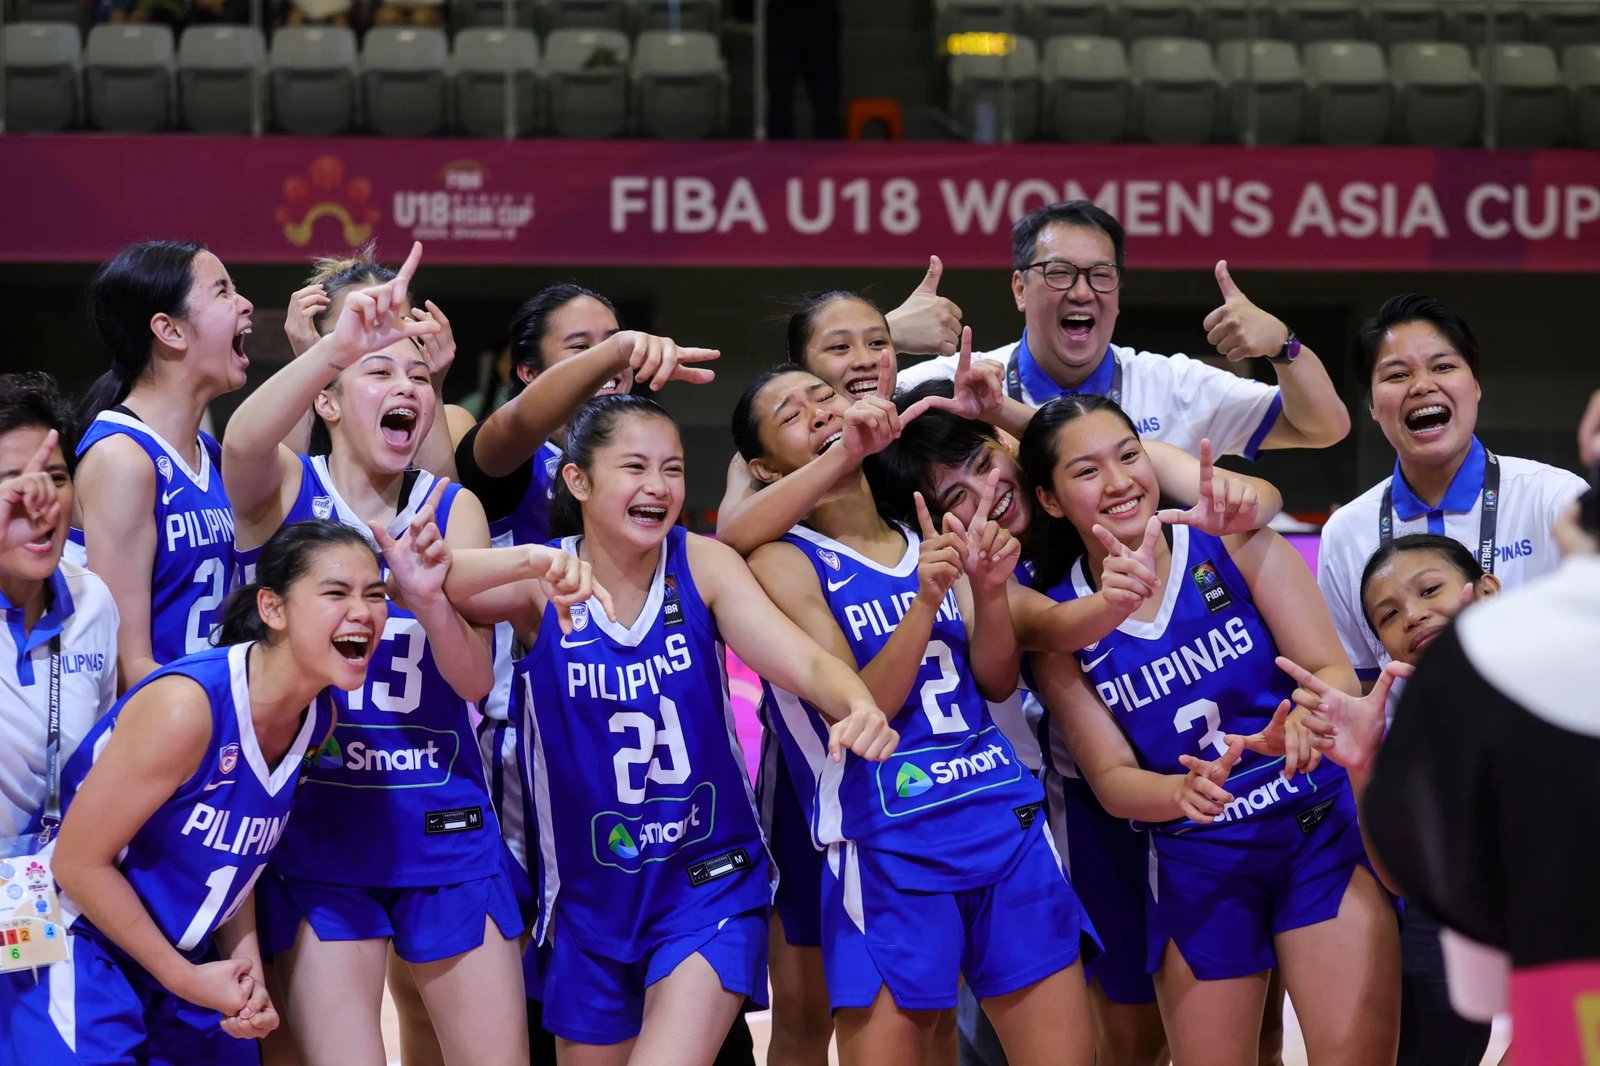 Gilas girls earn Division A promotion after whipping Lebanon